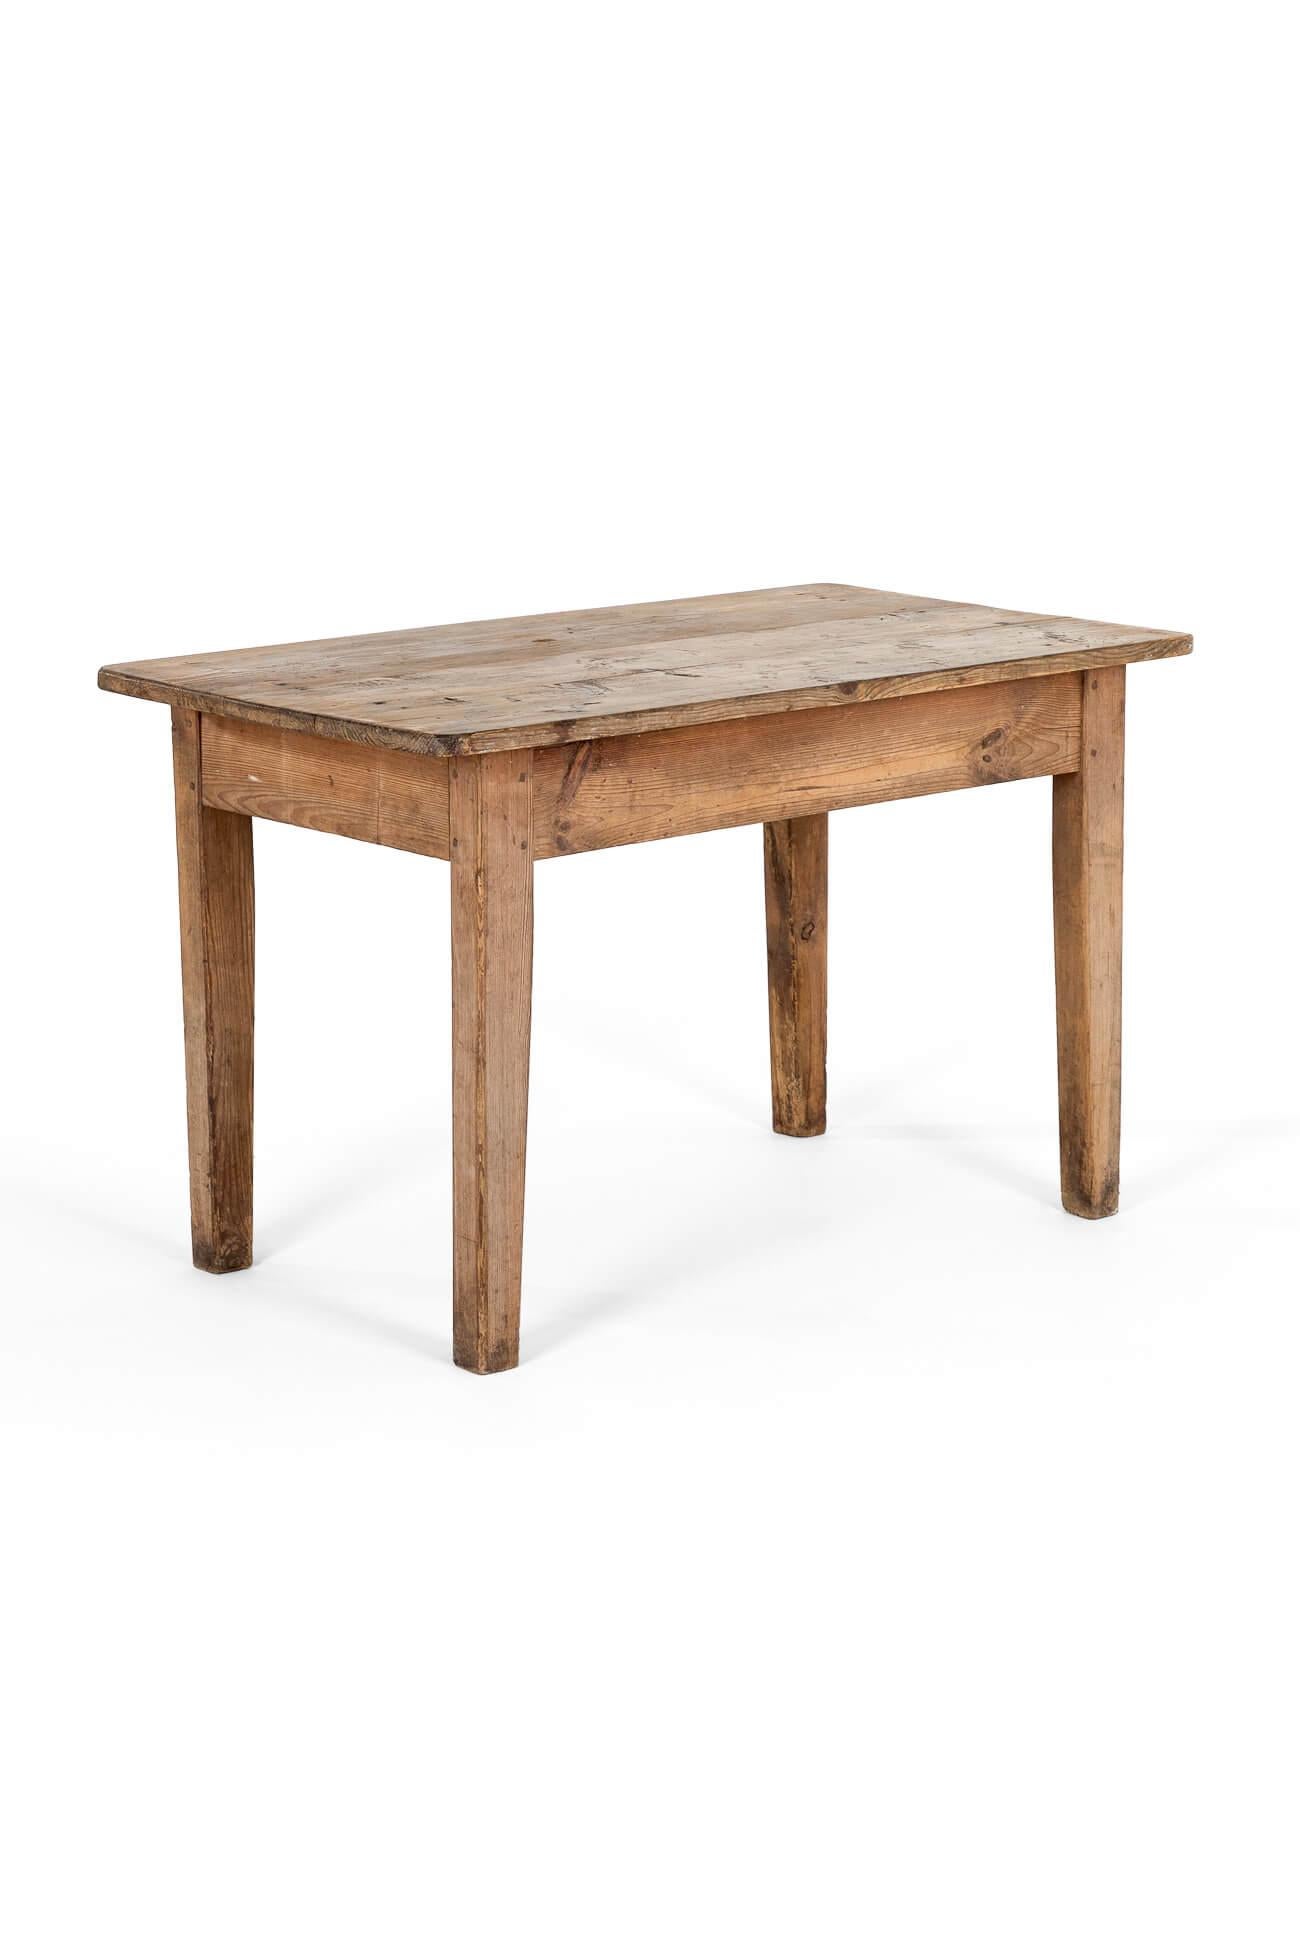 Early Victorian English Pine Side Table For Sale